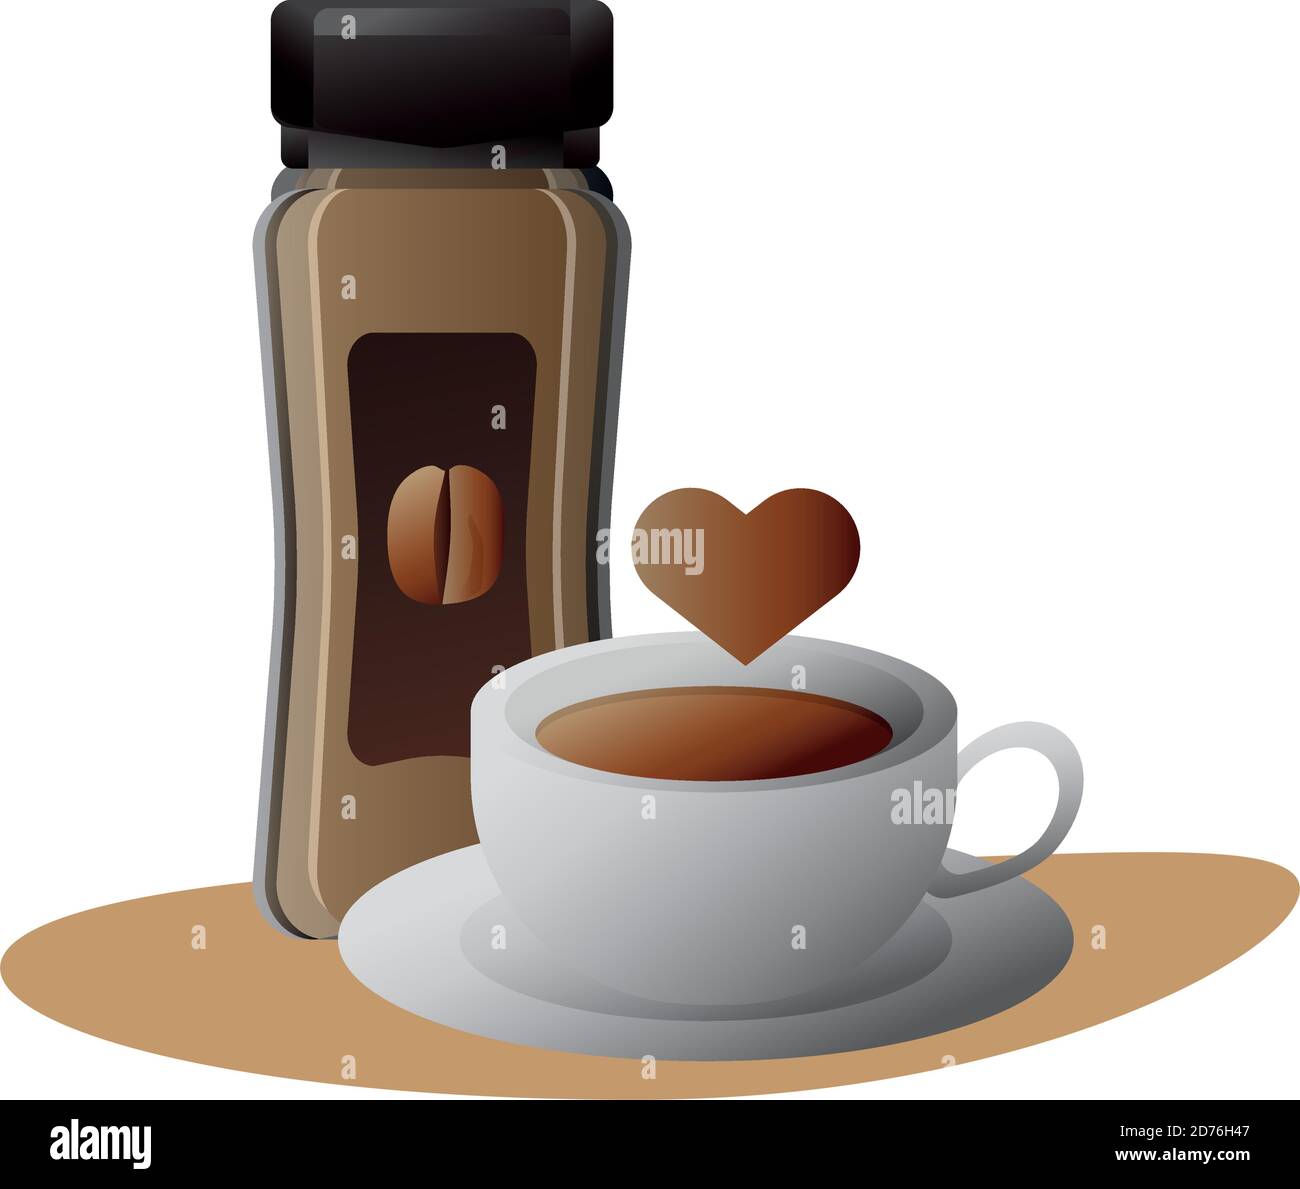 Coffee Vectors & Illustrations for Free Download